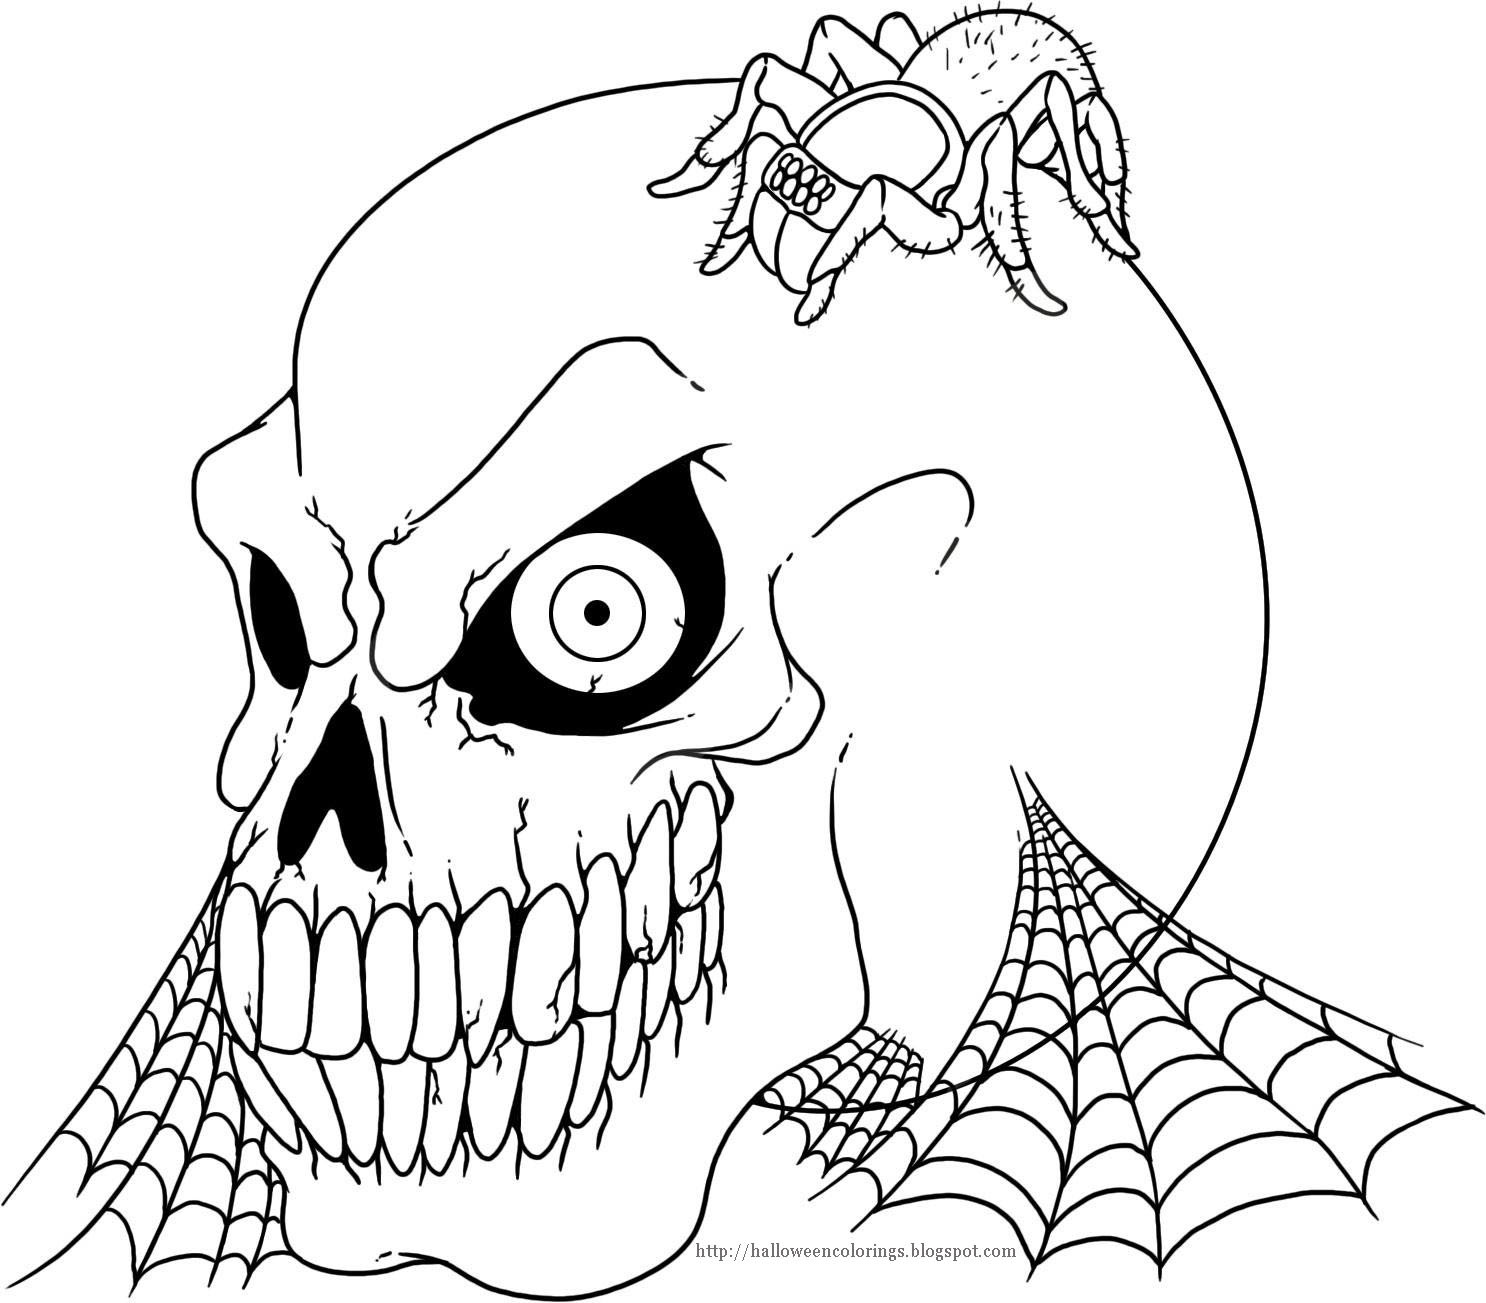 Halloween Coloring Pages Printable Free
 HALLOWEEN COLORINGS